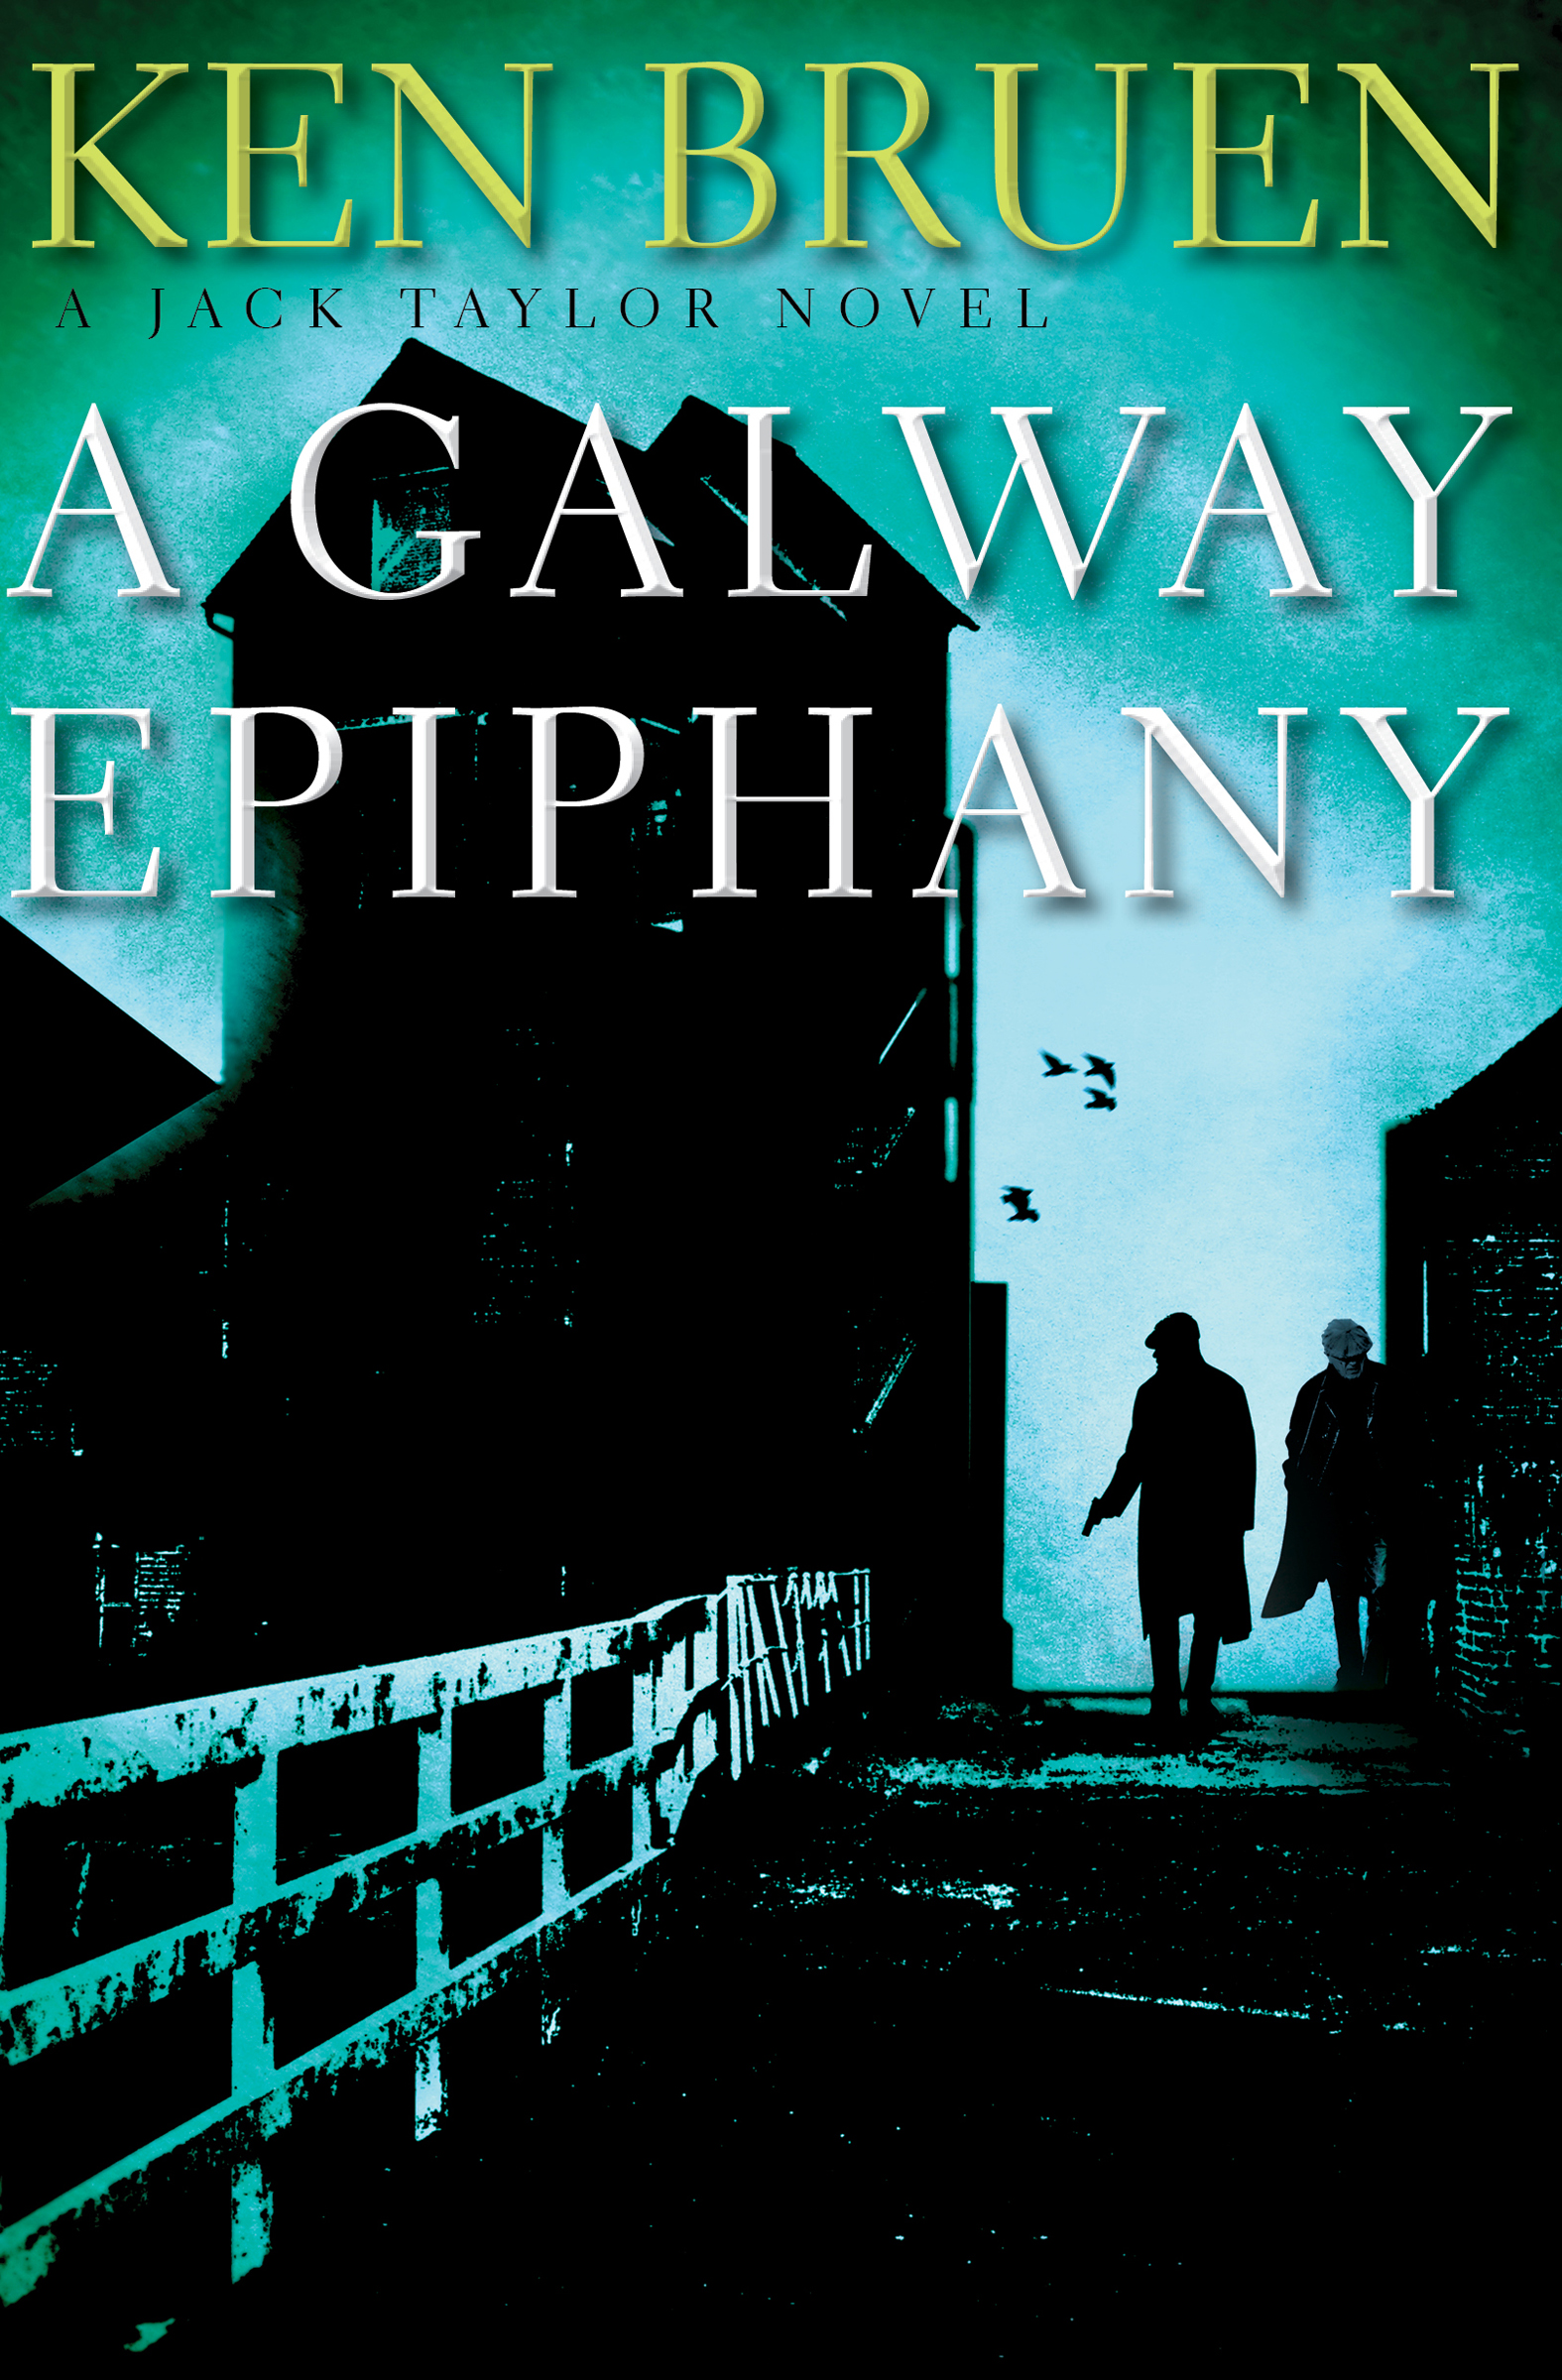 A Galway Epiphany cover image